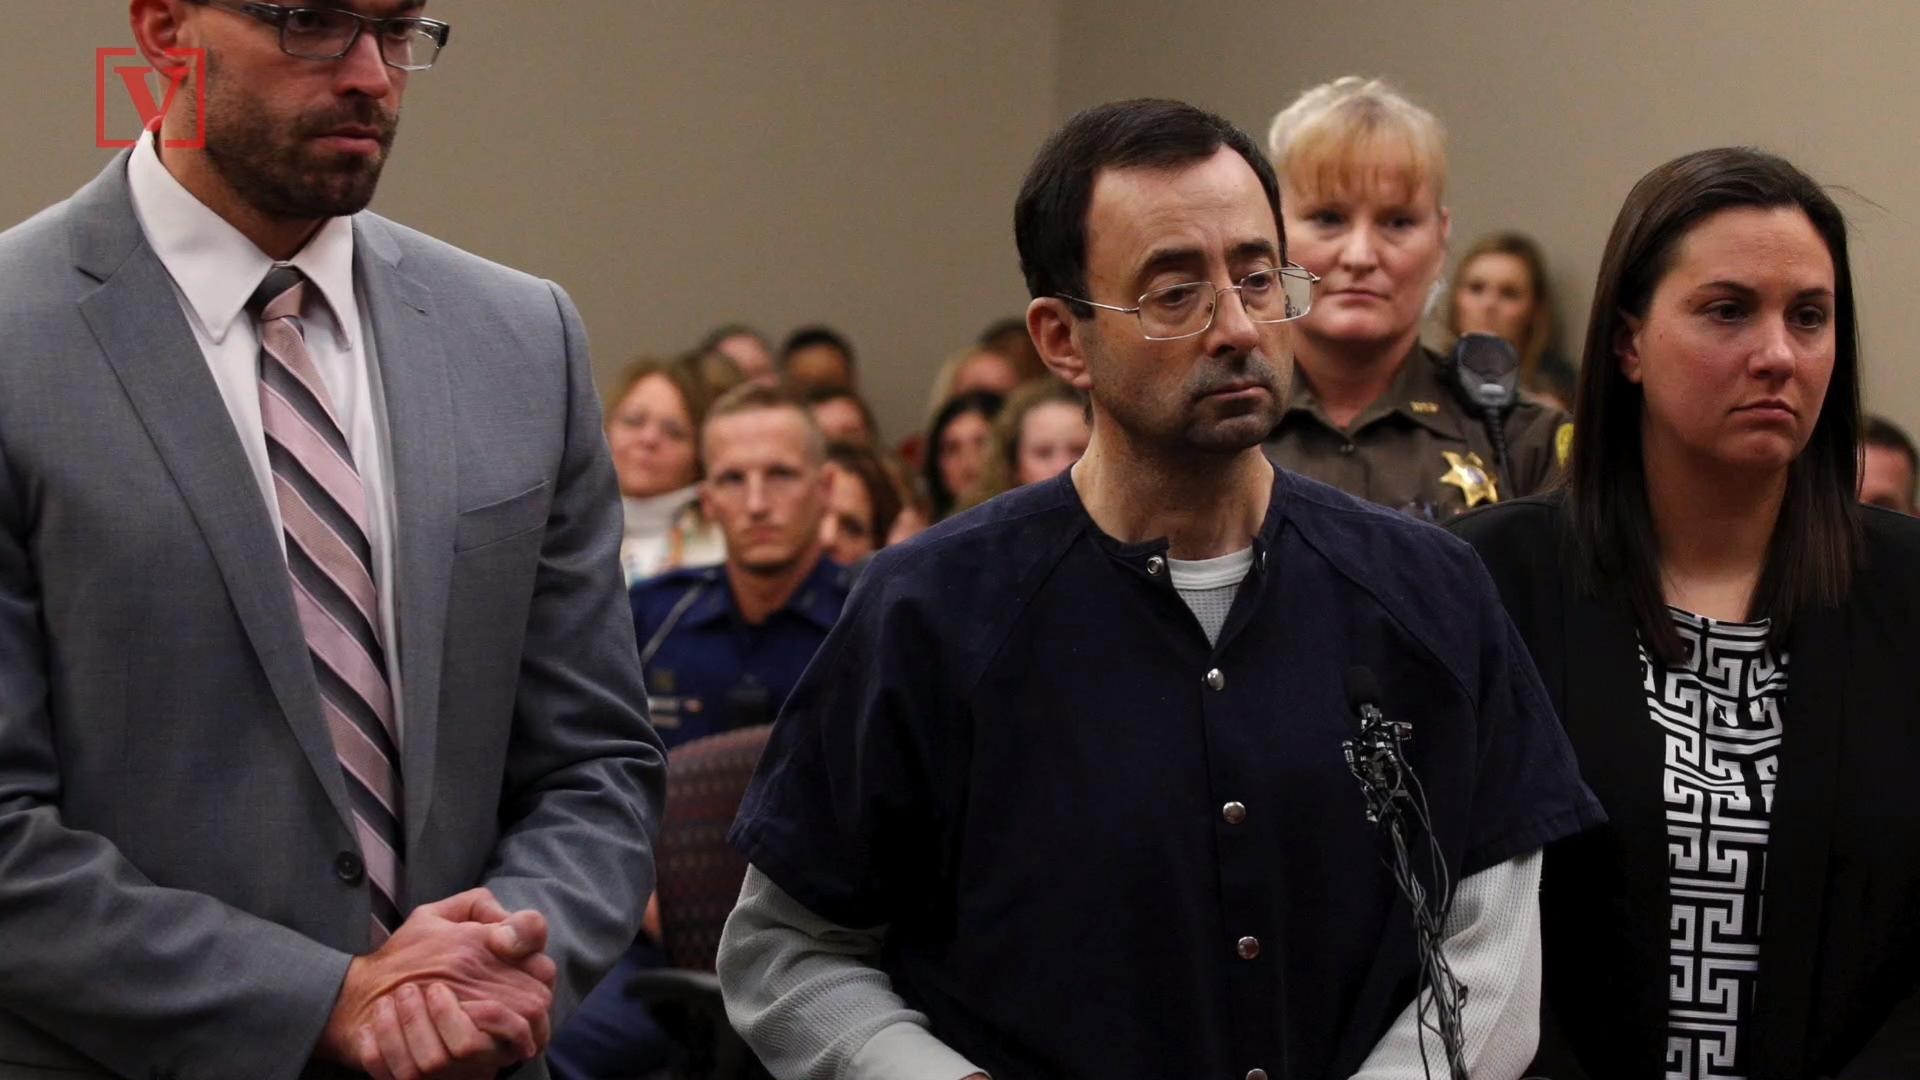 Larry Nassar, the once powerful team physician of USA Gymnastics, has received a sentence of between 40 and 175 years behind bars. Veuer's Nathan Rousseau Smith (@FantasticMrNate) has the story.